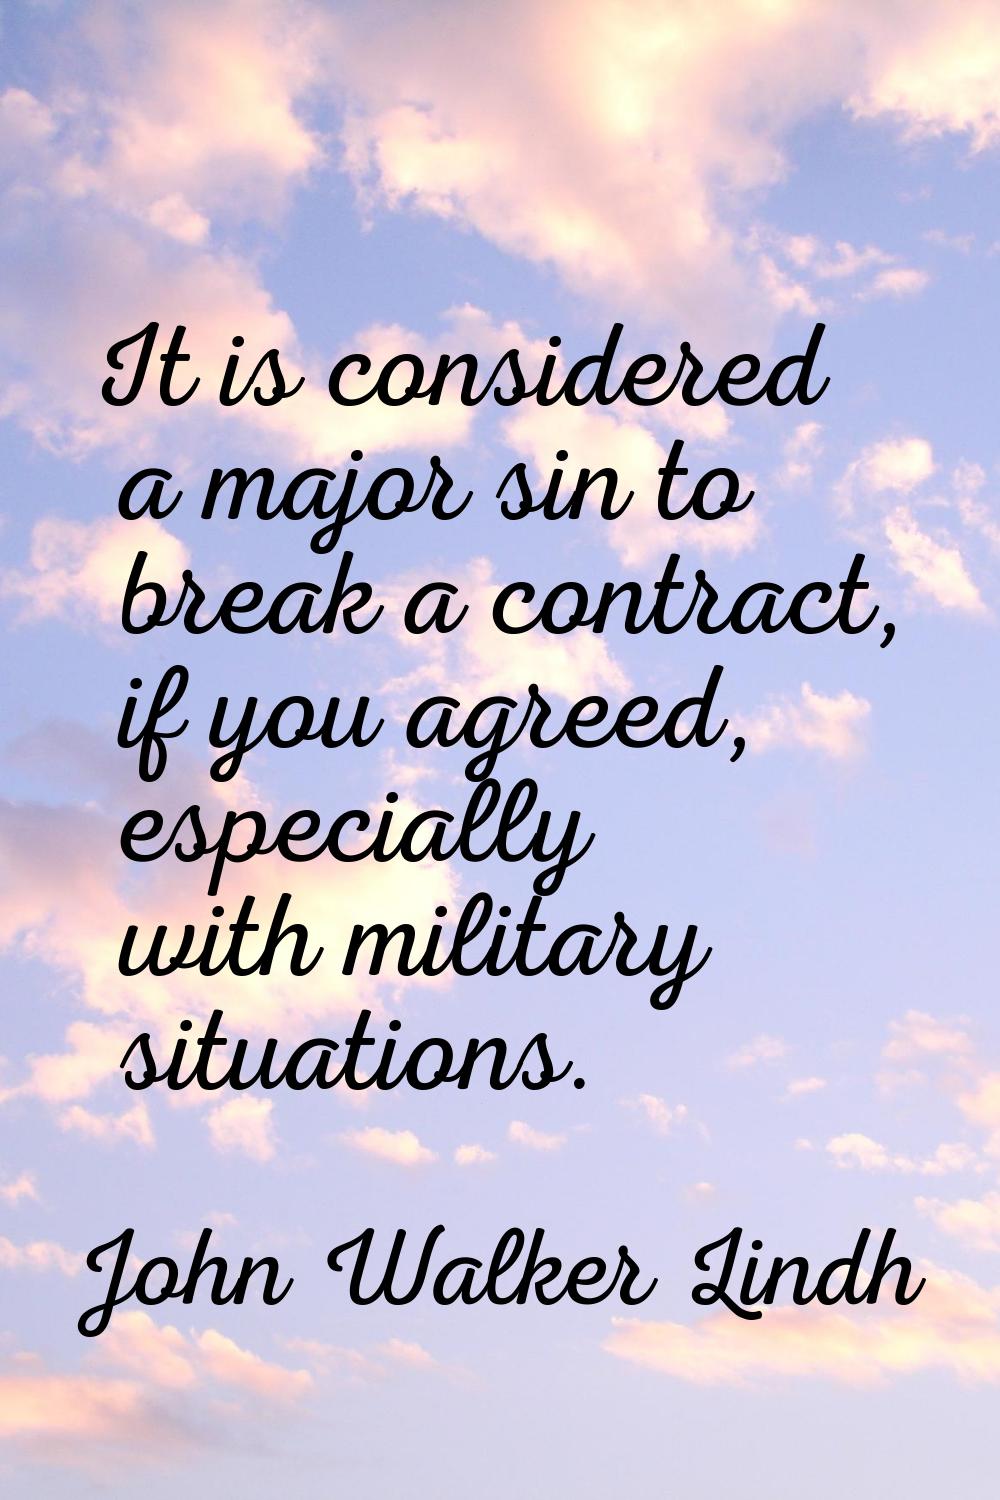 It is considered a major sin to break a contract, if you agreed, especially with military situation